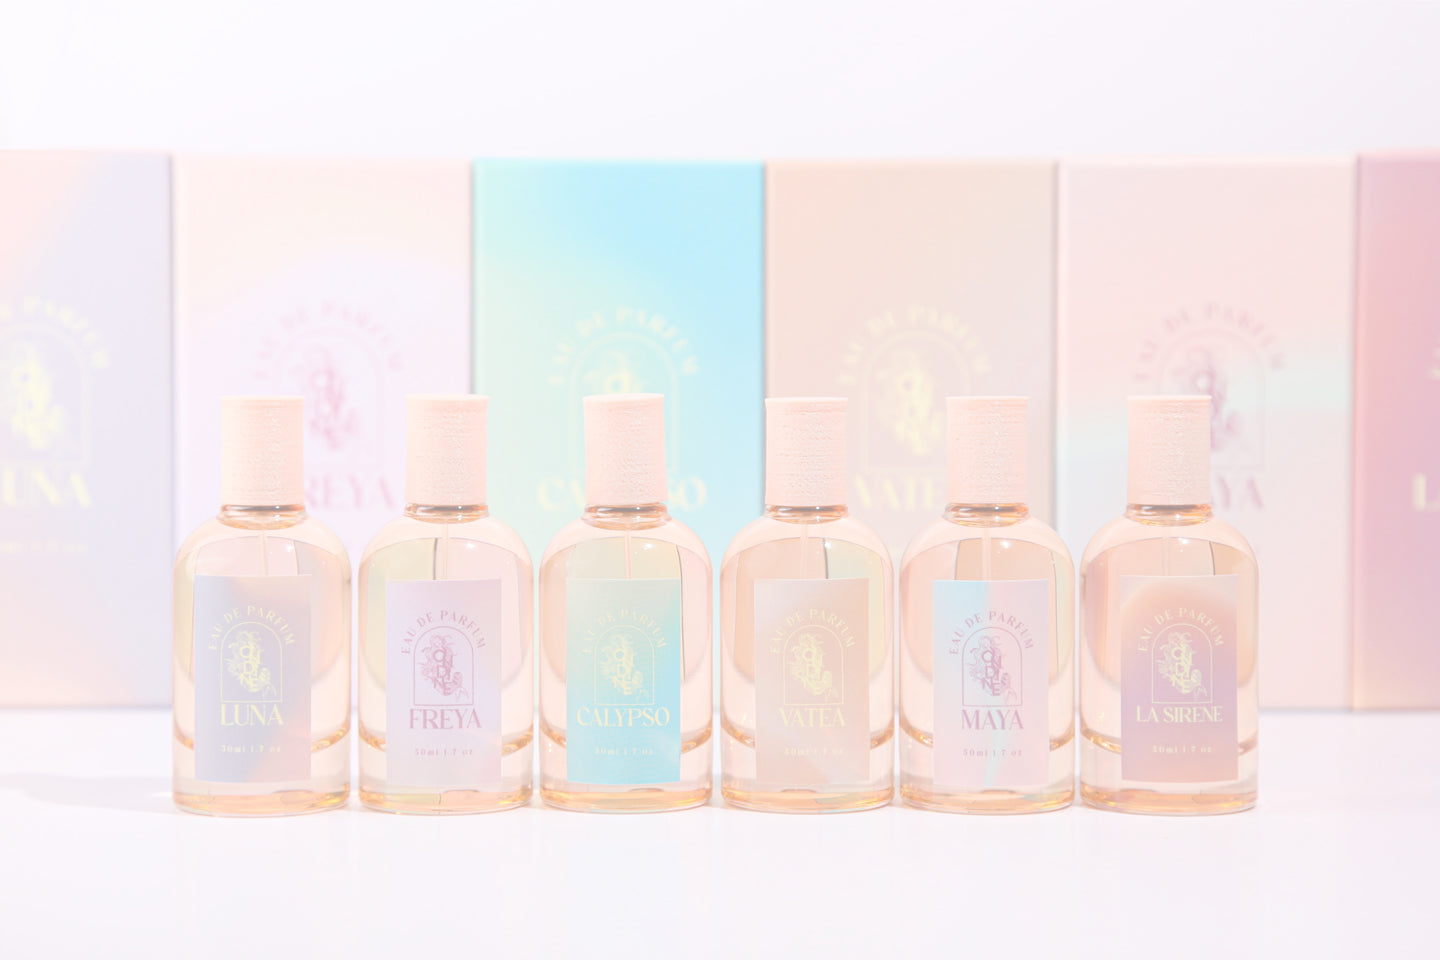 Ondine Perfume, six peachy pink coloured glass bottles with pastel gradient labels in various pastel colours, featuring pink coloured landfill biodegradable caps. Background shows matching pastel coloured gradient boxes for all 6 perfumes